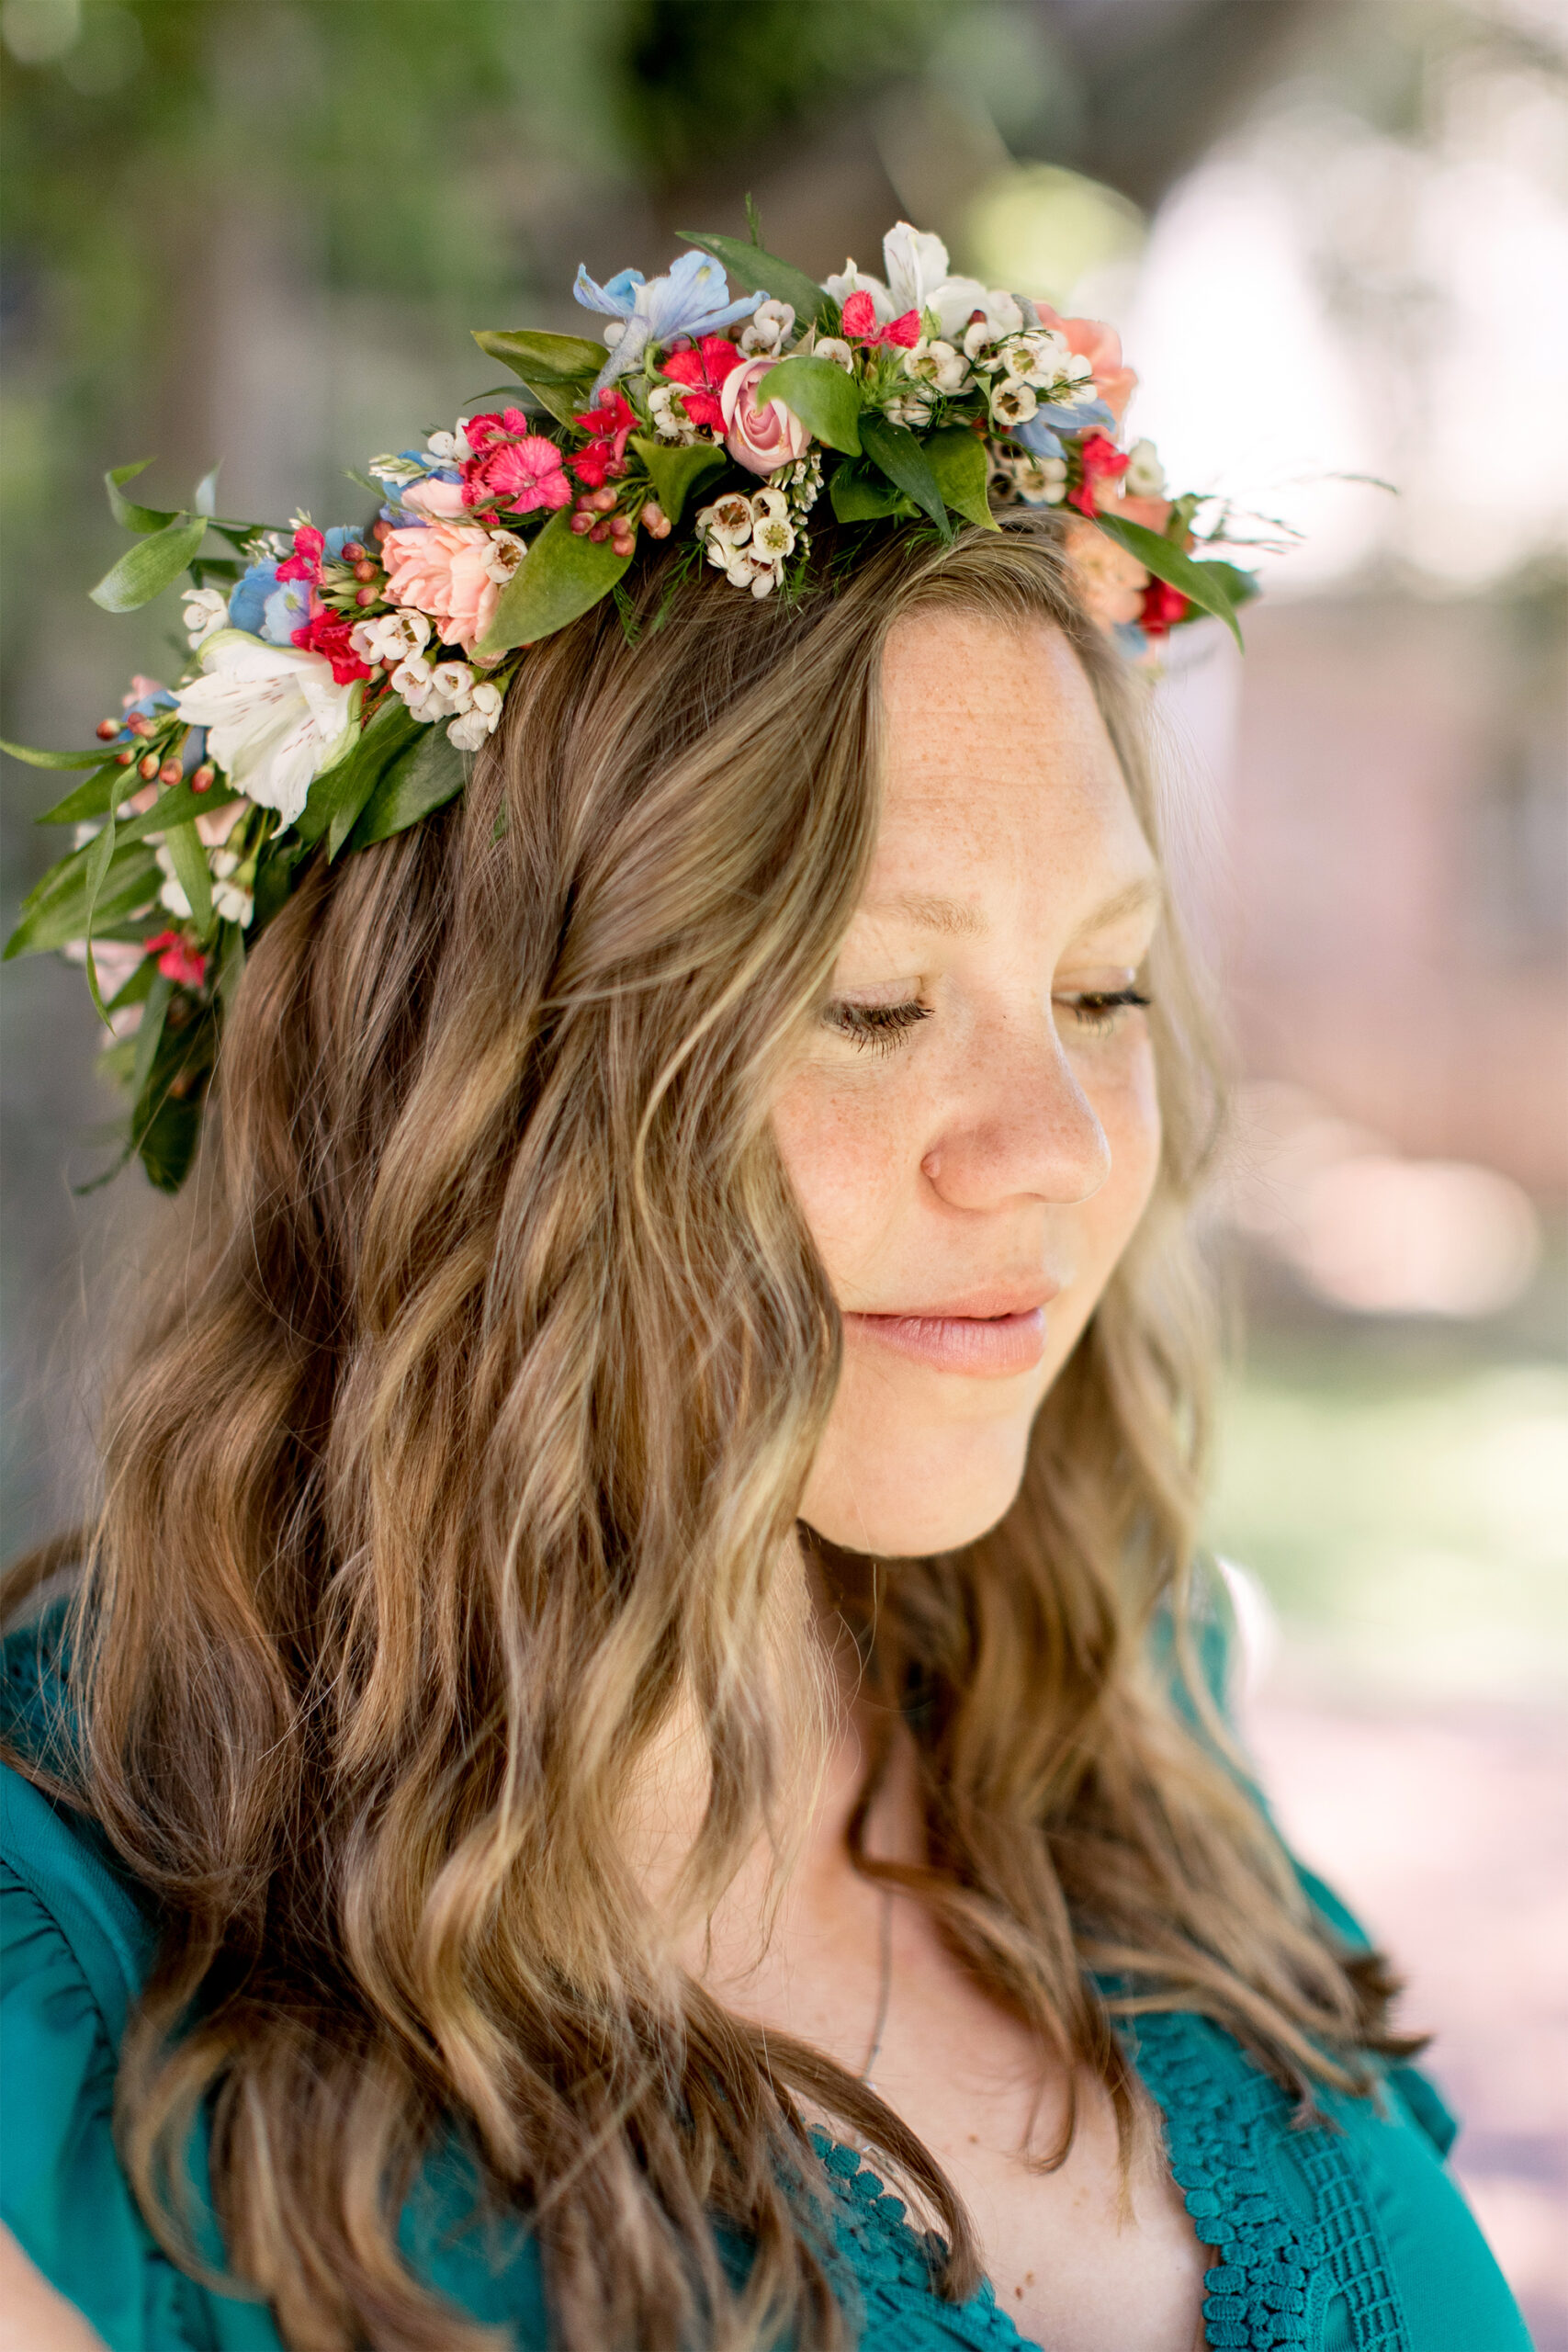 Woman wearing a colorful flower crown